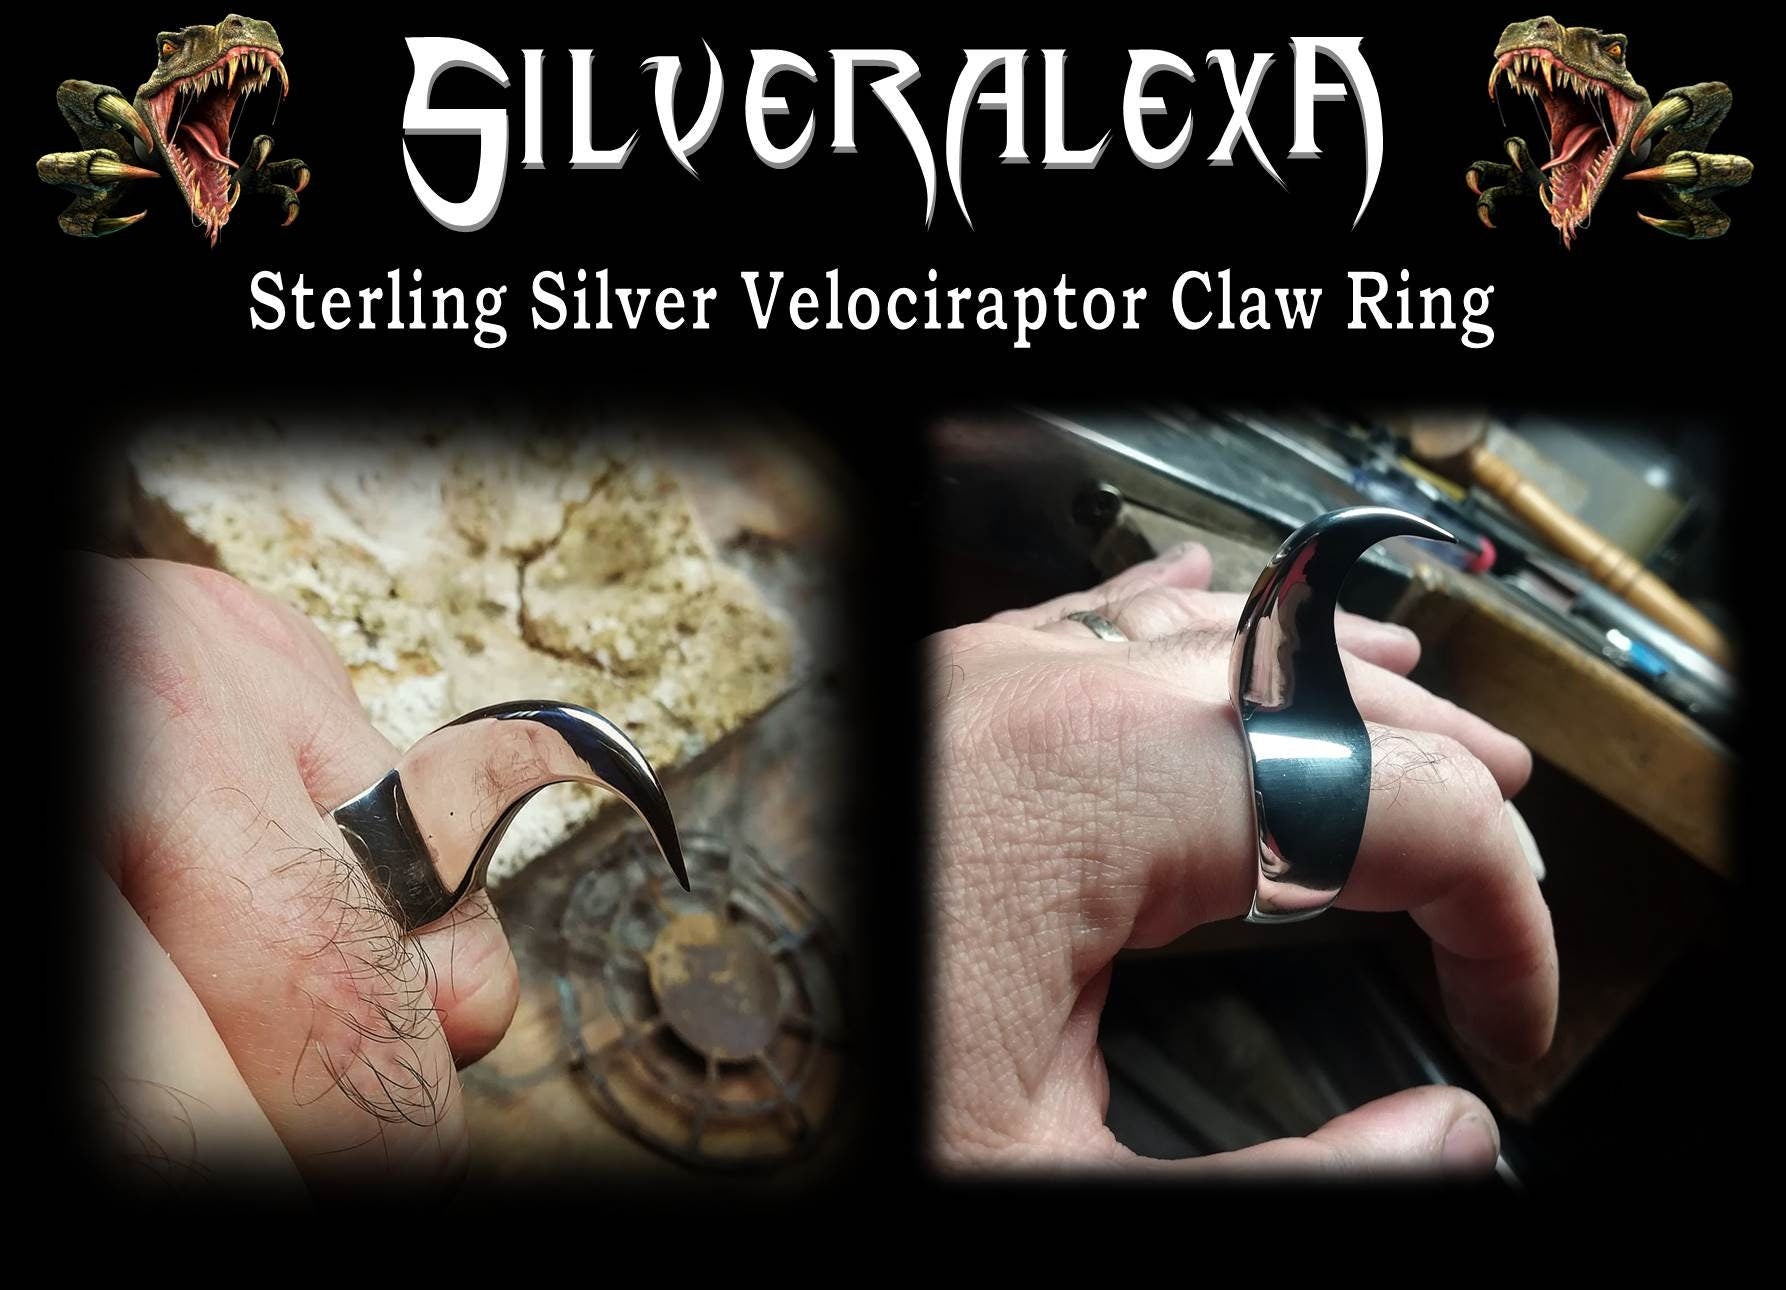 Claw ring - Sterling Silver Velociraptor Claw Ring - ALL SIZES